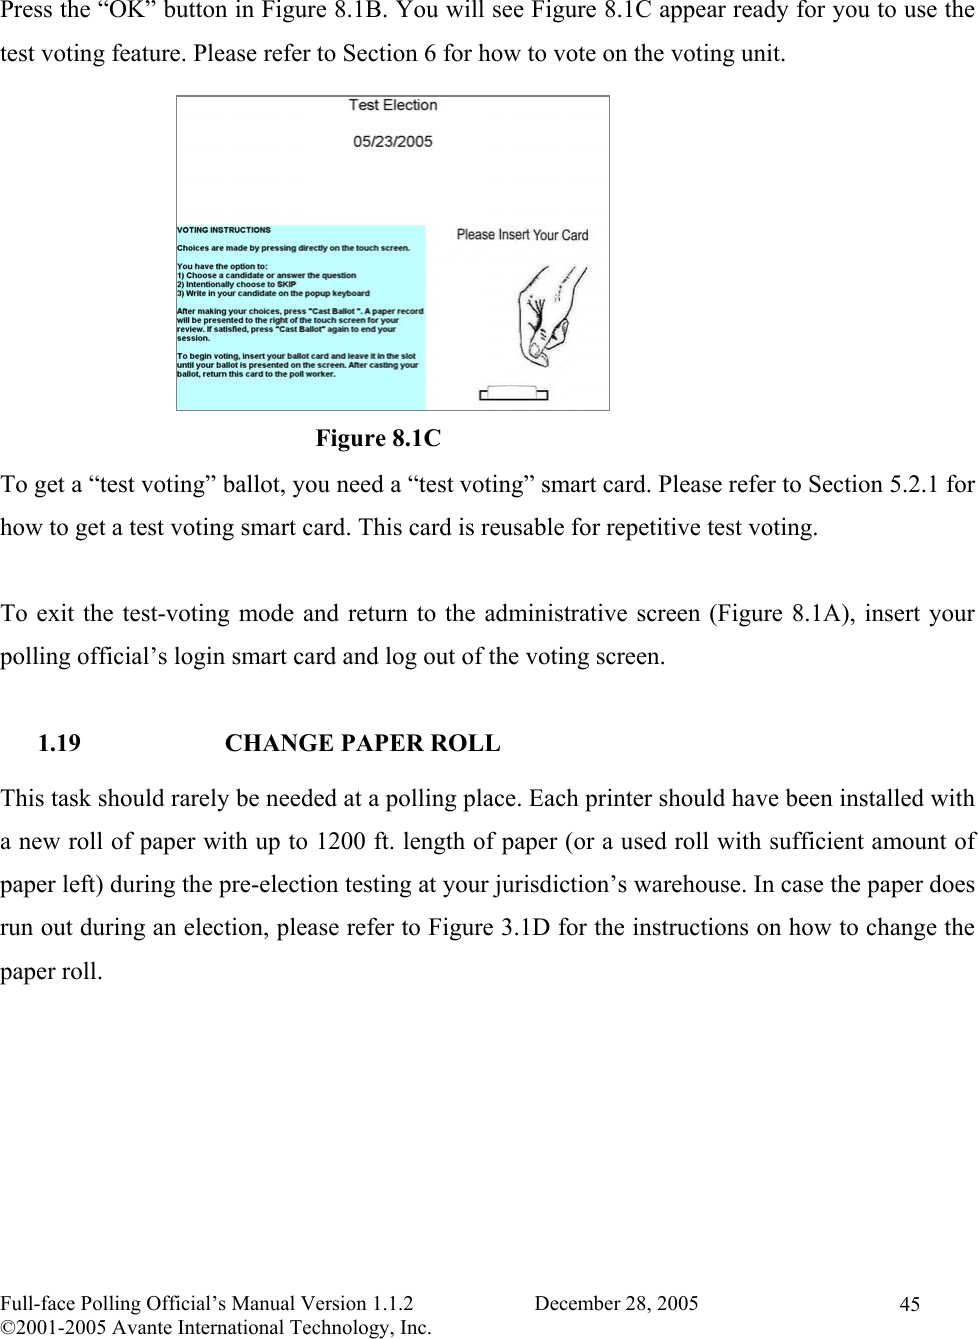    Full-face Polling Official’s Manual Version 1.1.2                       December 28, 2005 ©2001-2005 Avante International Technology, Inc.   45 Press the “OK” button in Figure 8.1B. You will see Figure 8.1C appear ready for you to use the test voting feature. Please refer to Section 6 for how to vote on the voting unit.            To get a “test voting” ballot, you need a “test voting” smart card. Please refer to Section 5.2.1 for how to get a test voting smart card. This card is reusable for repetitive test voting.  To exit the test-voting mode and return to the administrative screen (Figure 8.1A), insert your polling official’s login smart card and log out of the voting screen.  1.19  CHANGE PAPER ROLL This task should rarely be needed at a polling place. Each printer should have been installed with a new roll of paper with up to 1200 ft. length of paper (or a used roll with sufficient amount of paper left) during the pre-election testing at your jurisdiction’s warehouse. In case the paper does run out during an election, please refer to Figure 3.1D for the instructions on how to change the paper roll. Figure 8.1C 